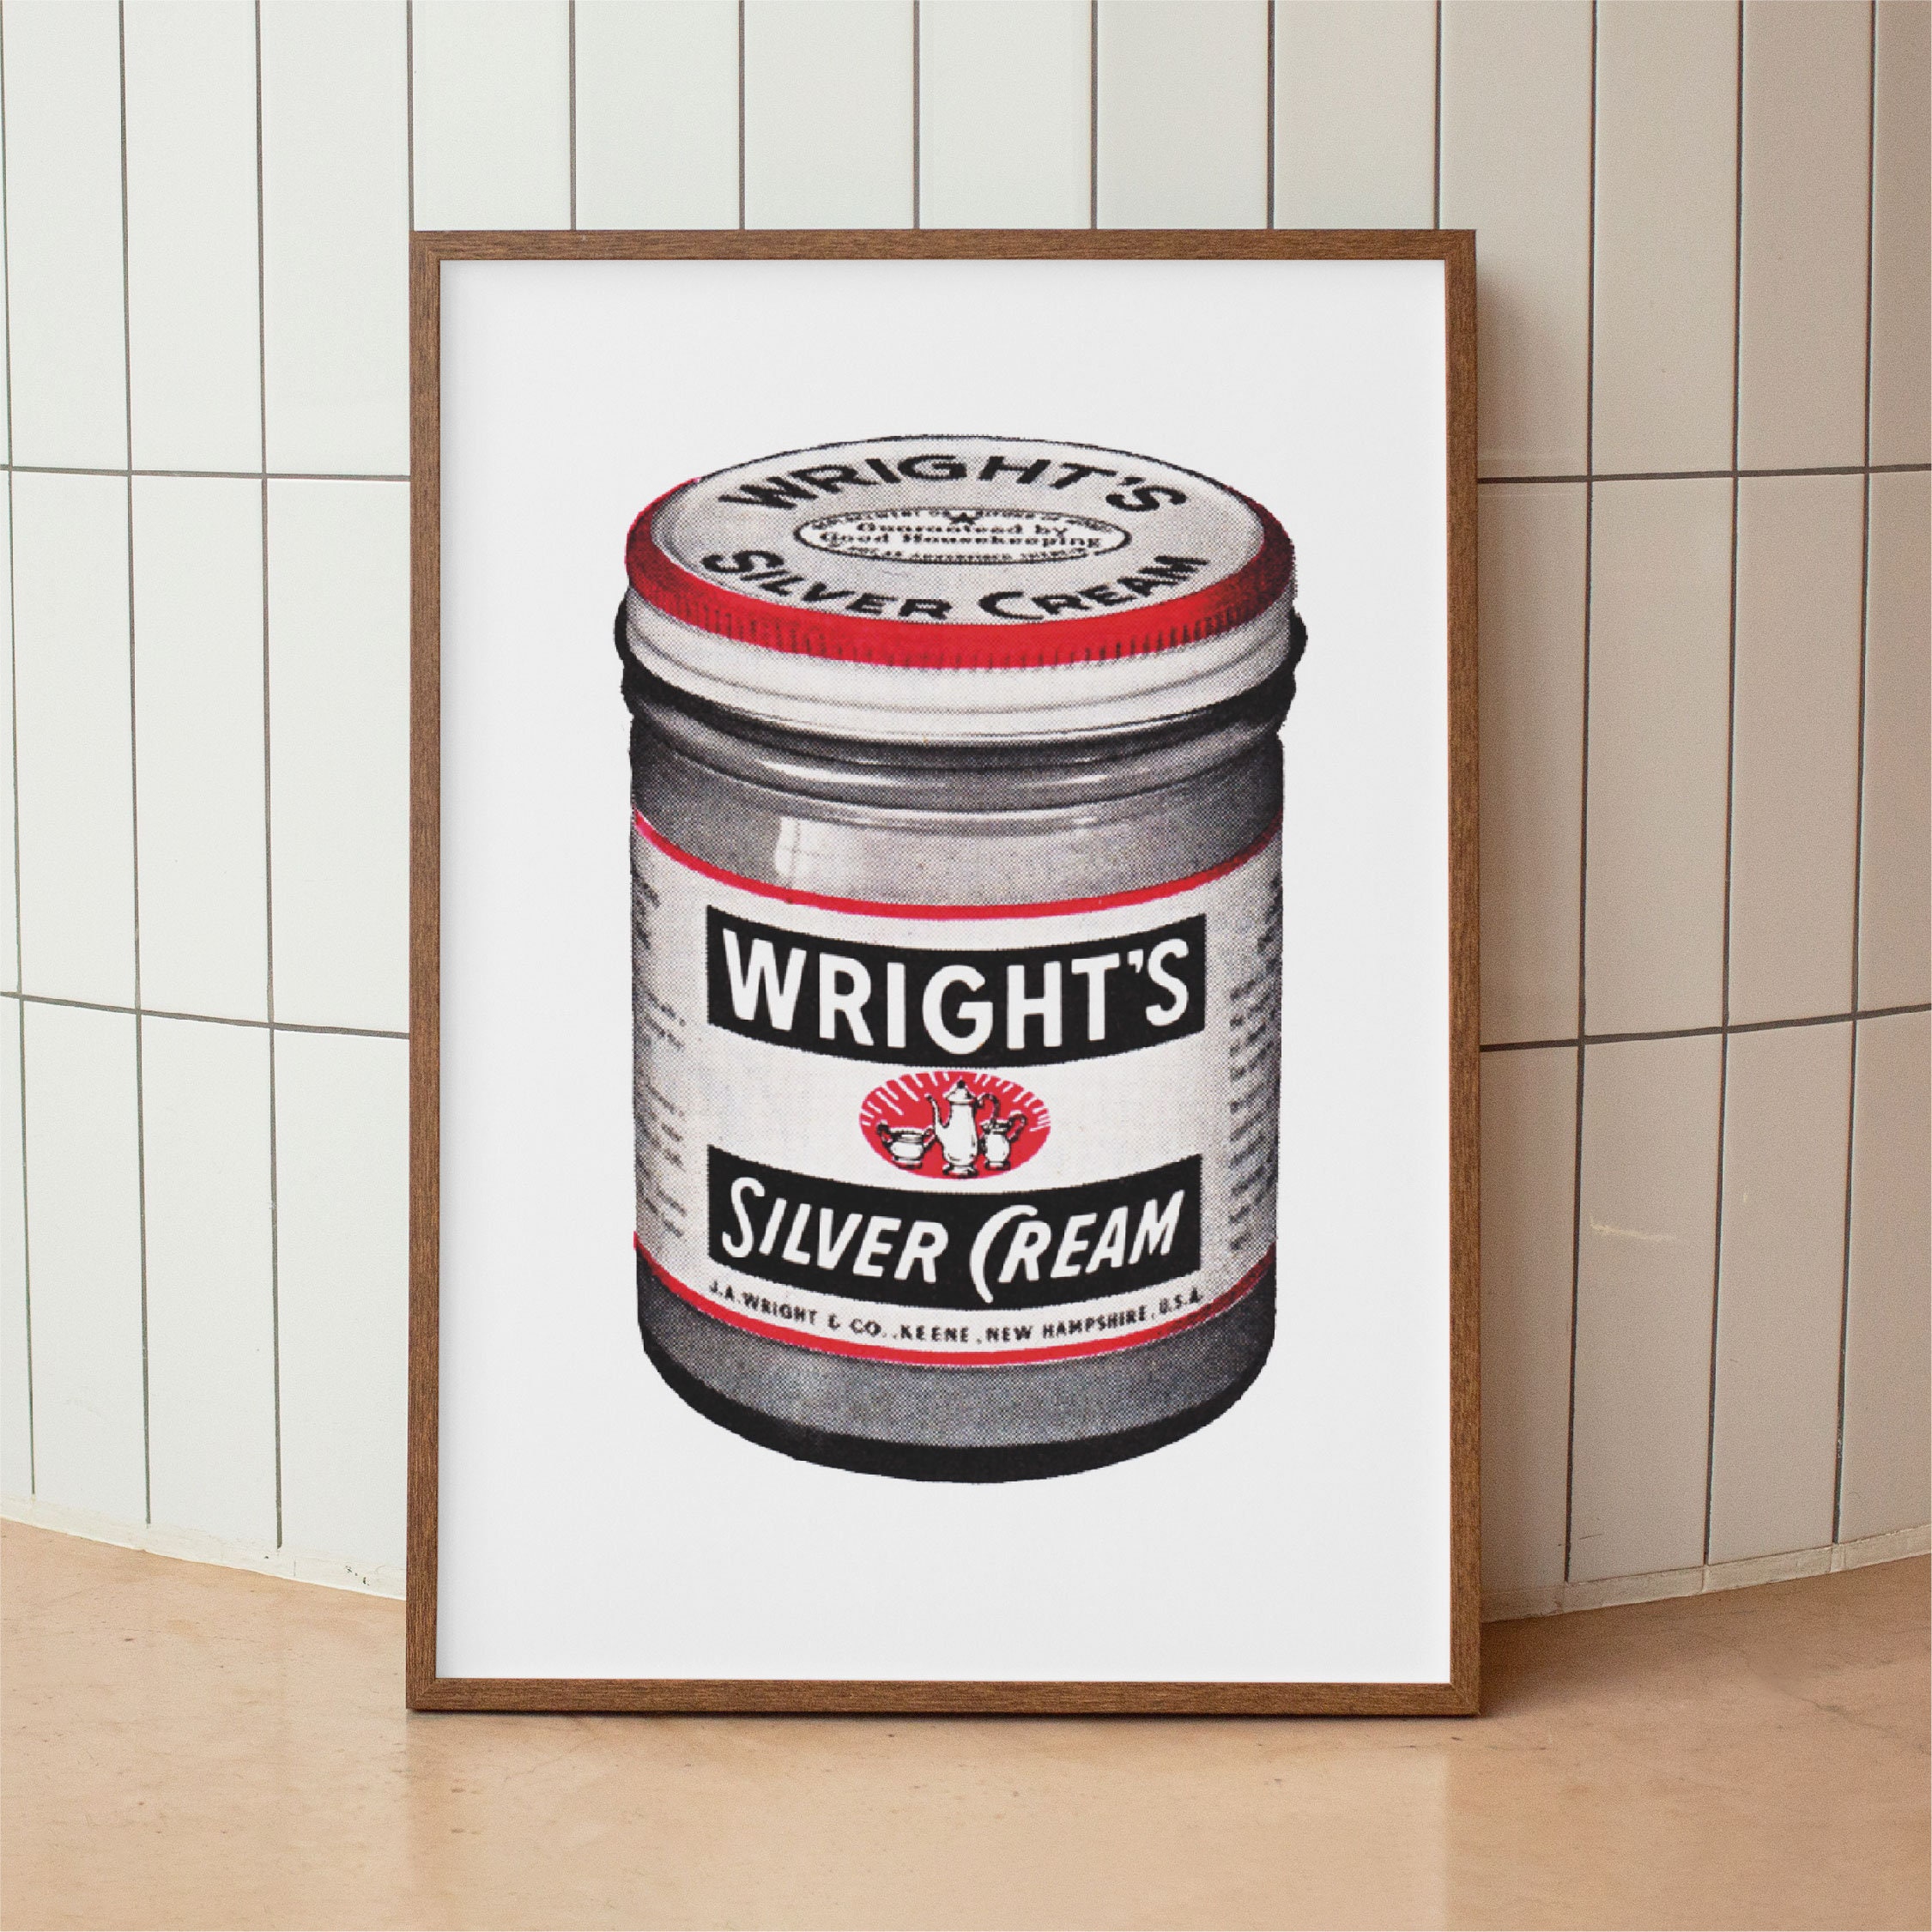 Vintage Wright's Silver Cream Polish full Jar Advertising Container Prop